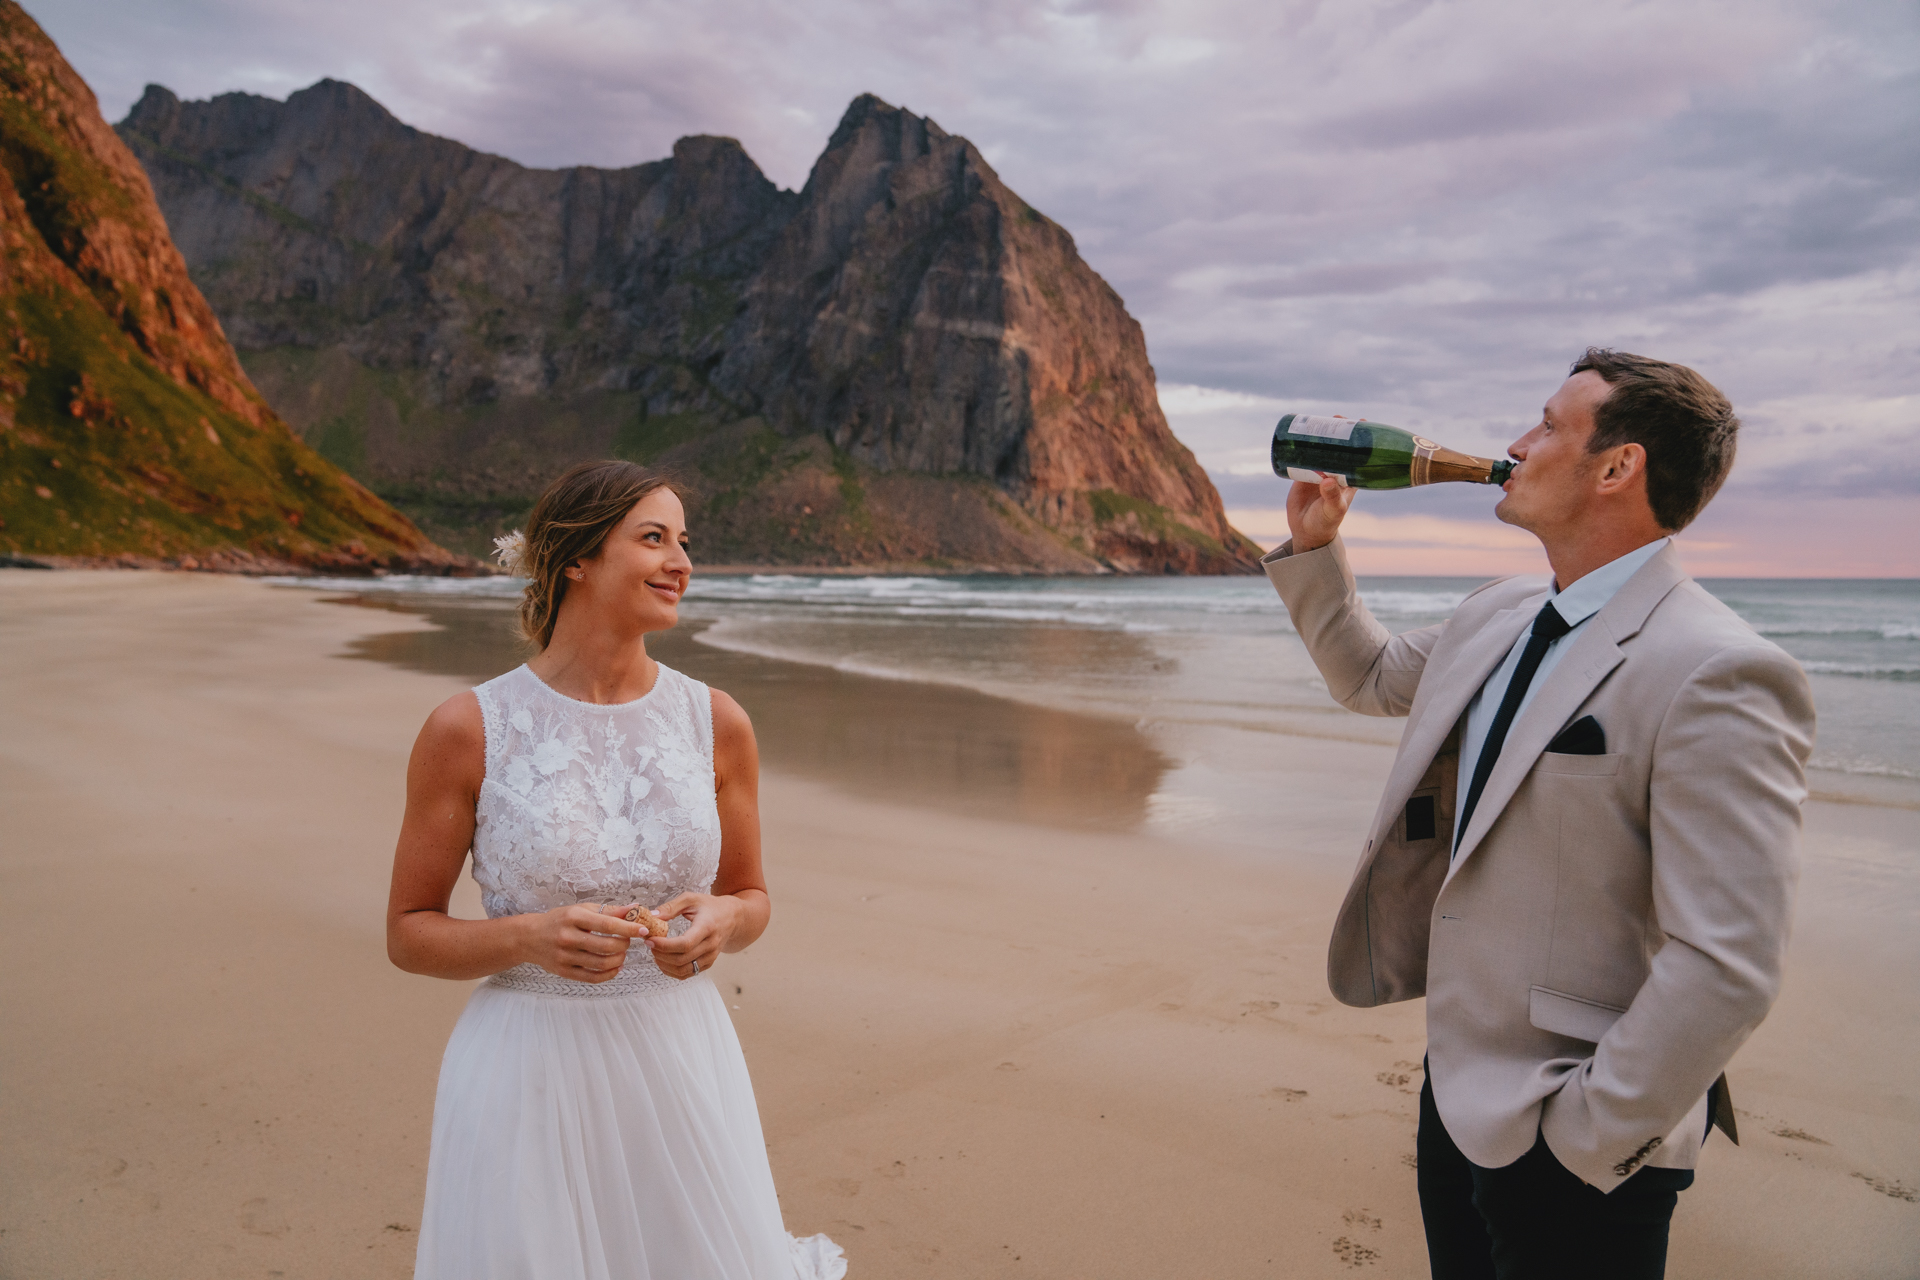 Multi day elopement with champagne in the Lofoten Islands - by Christin Eide Photography